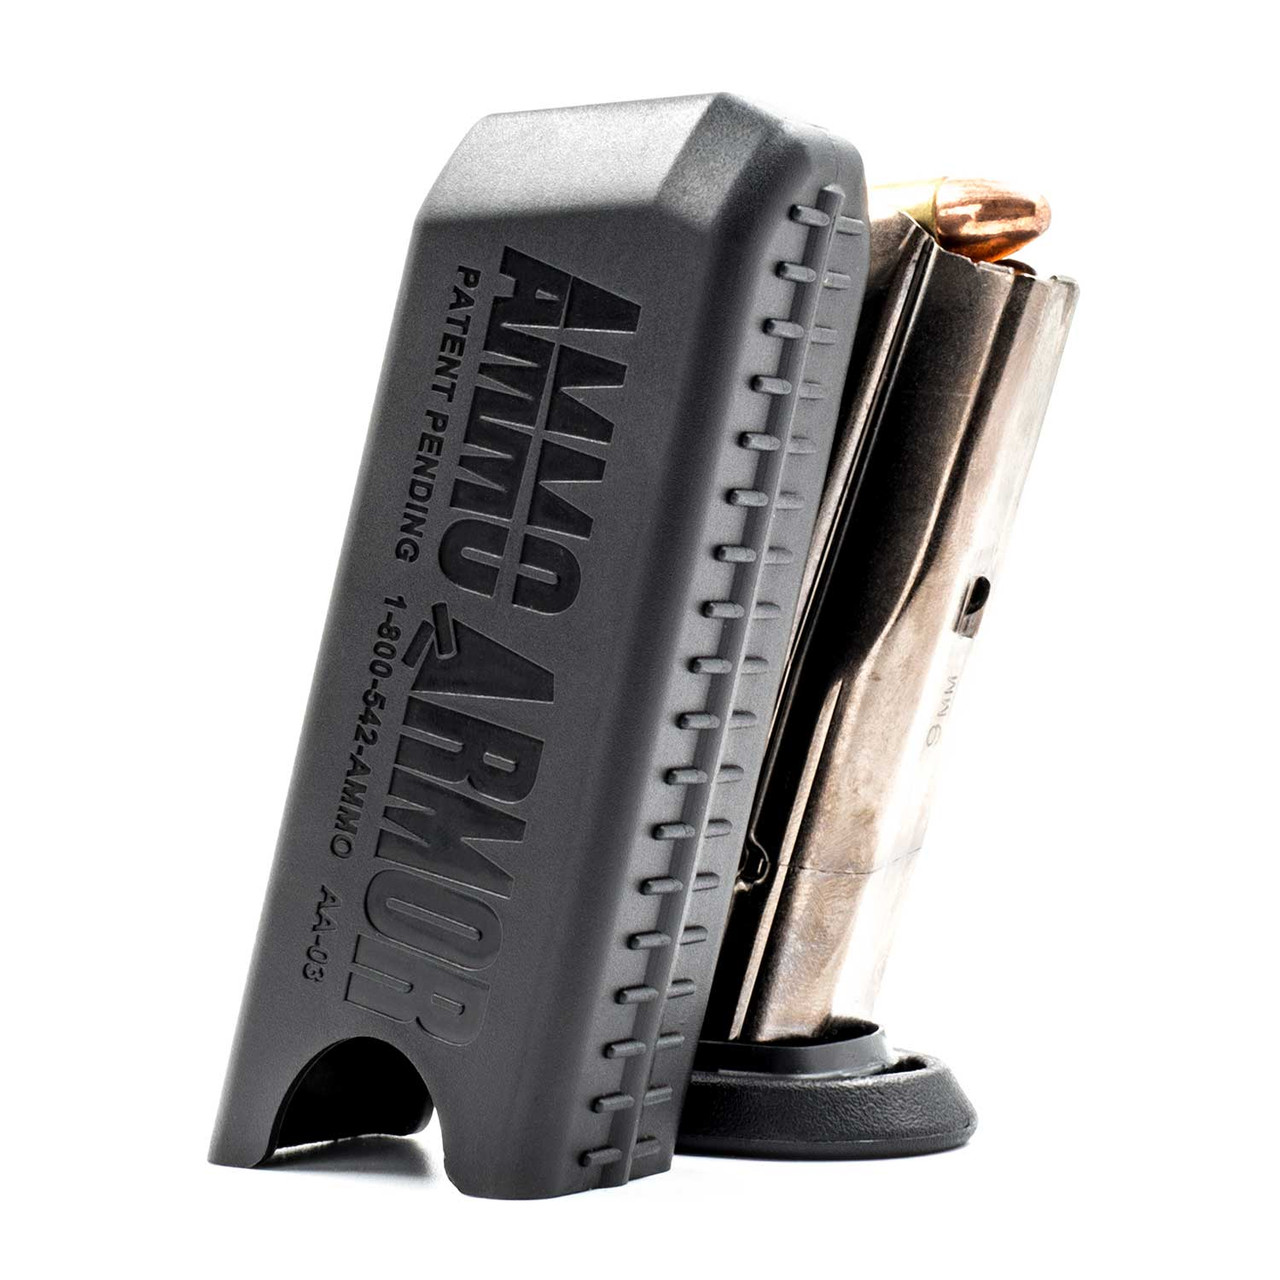 H&K VP9SK Compact Magazine Protector